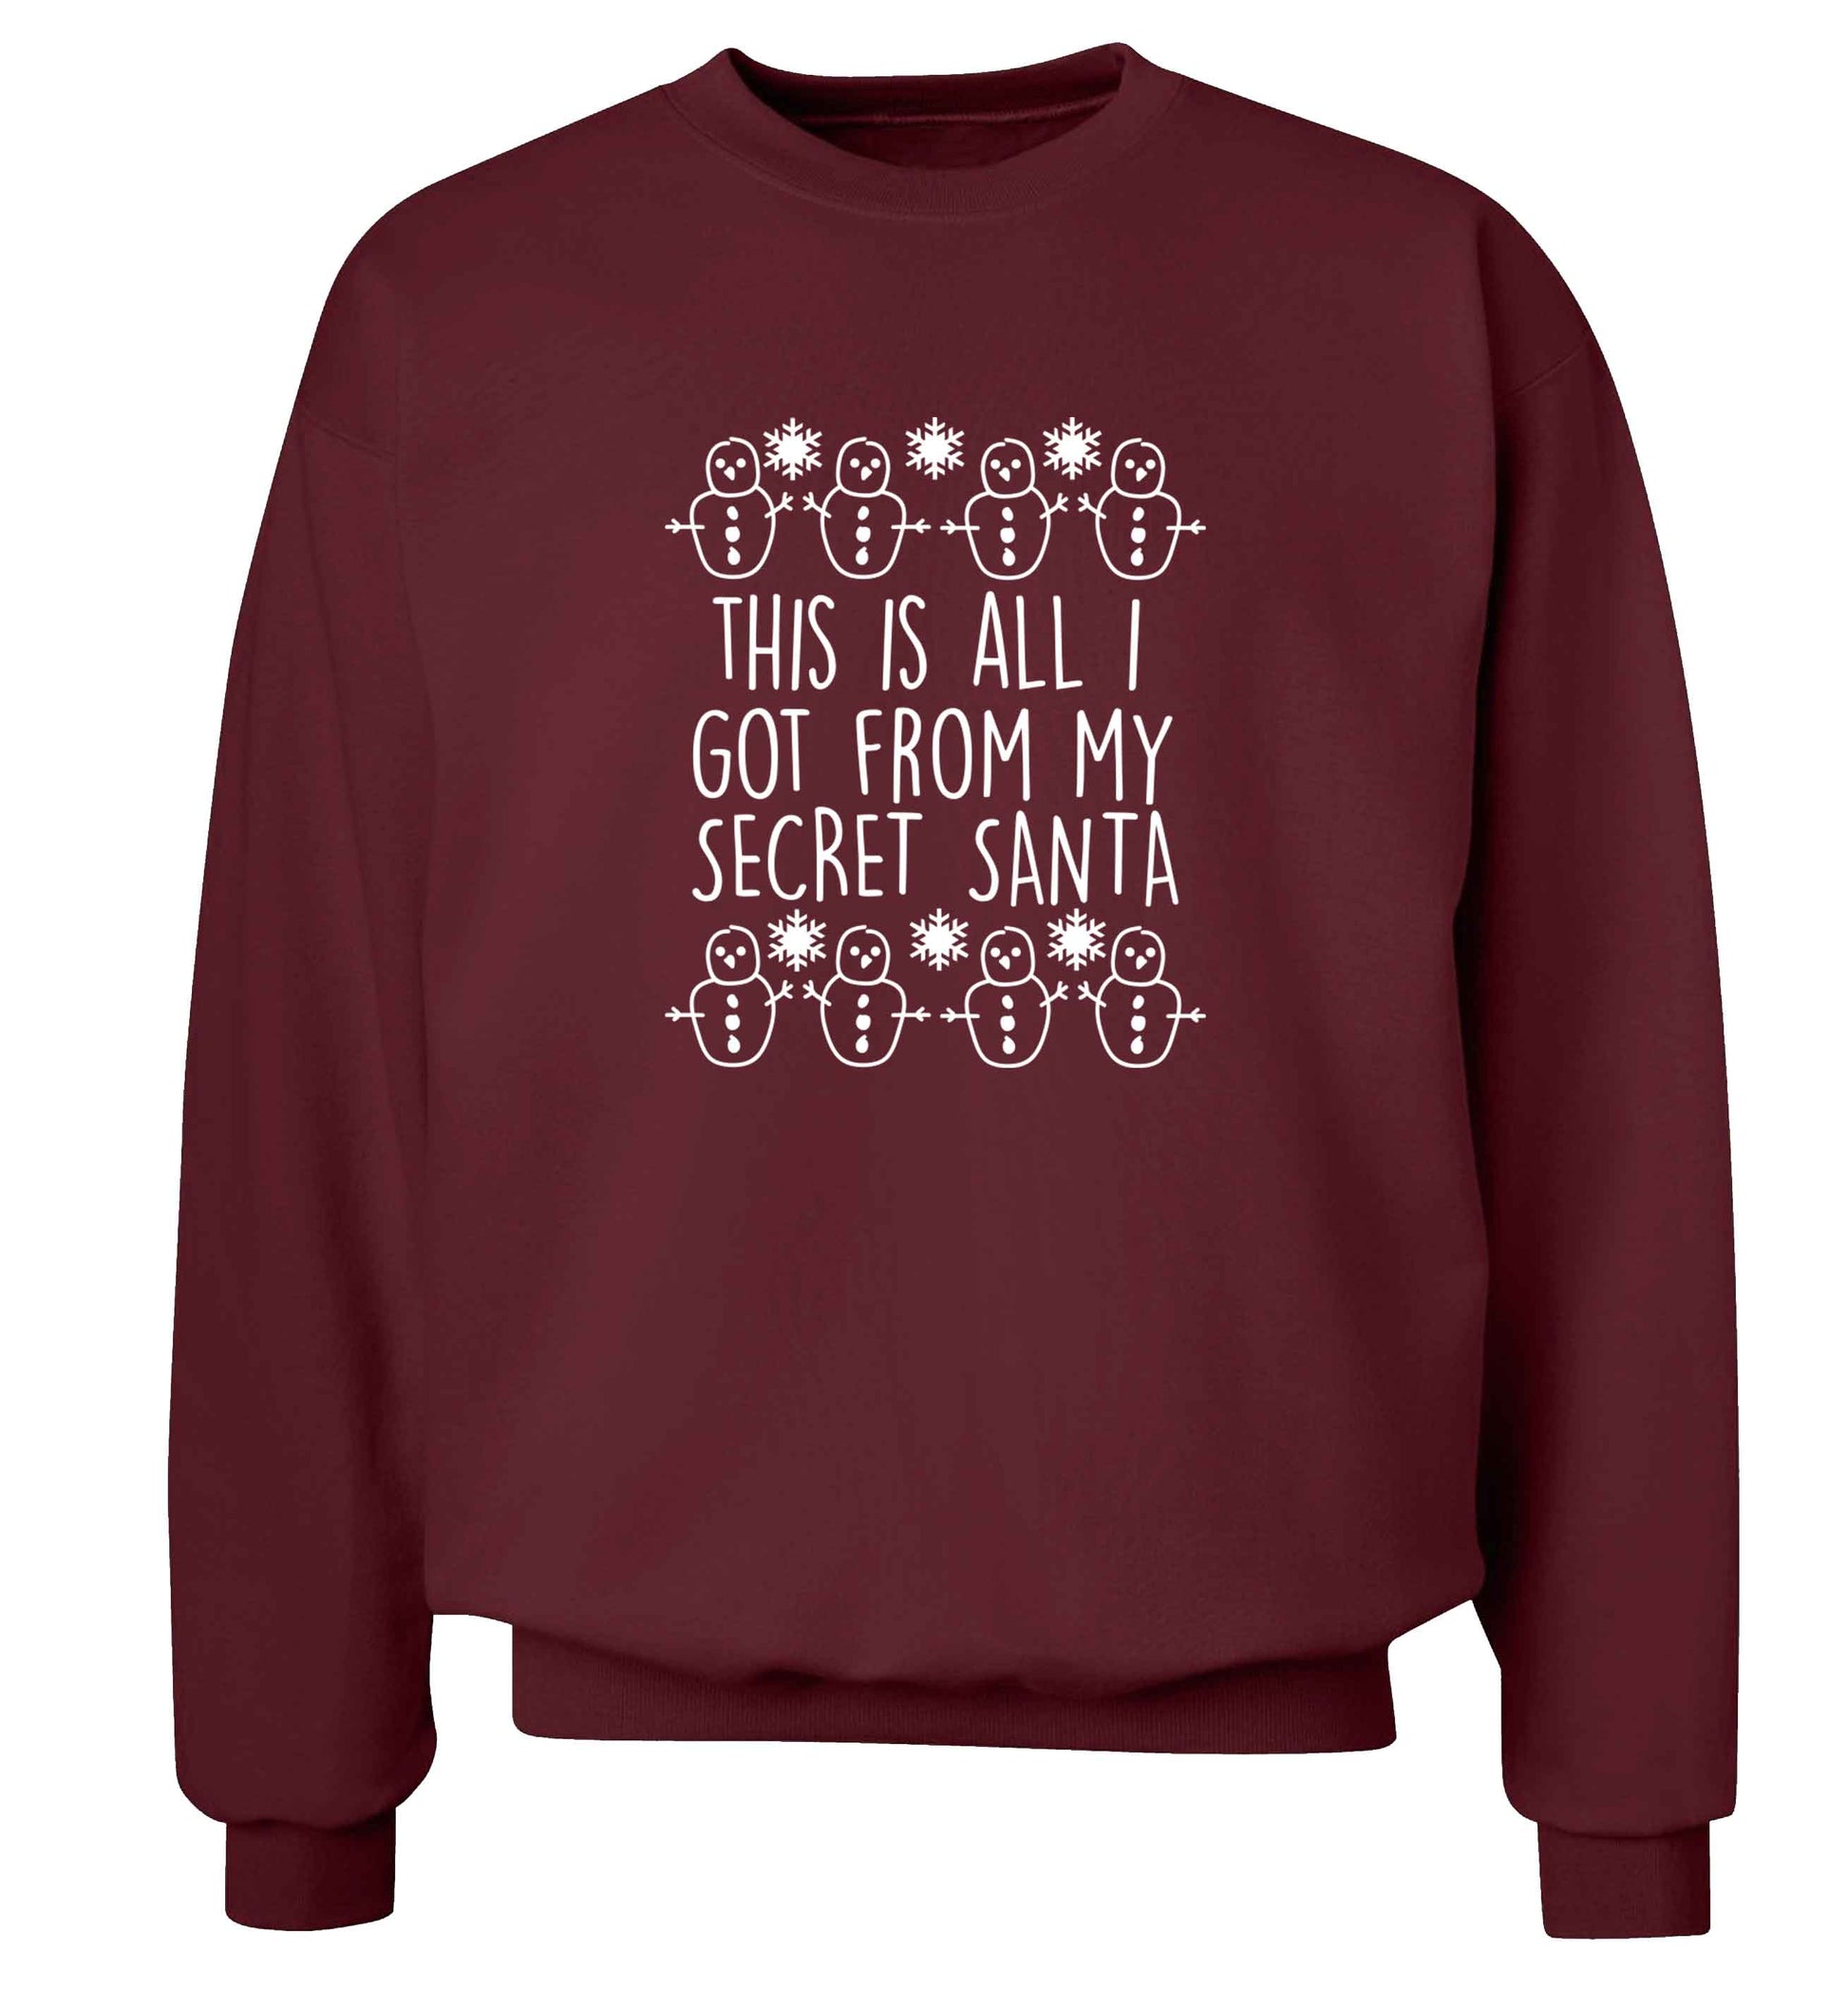 This is all I got from my secret Santa adult's unisex maroon sweater 2XL